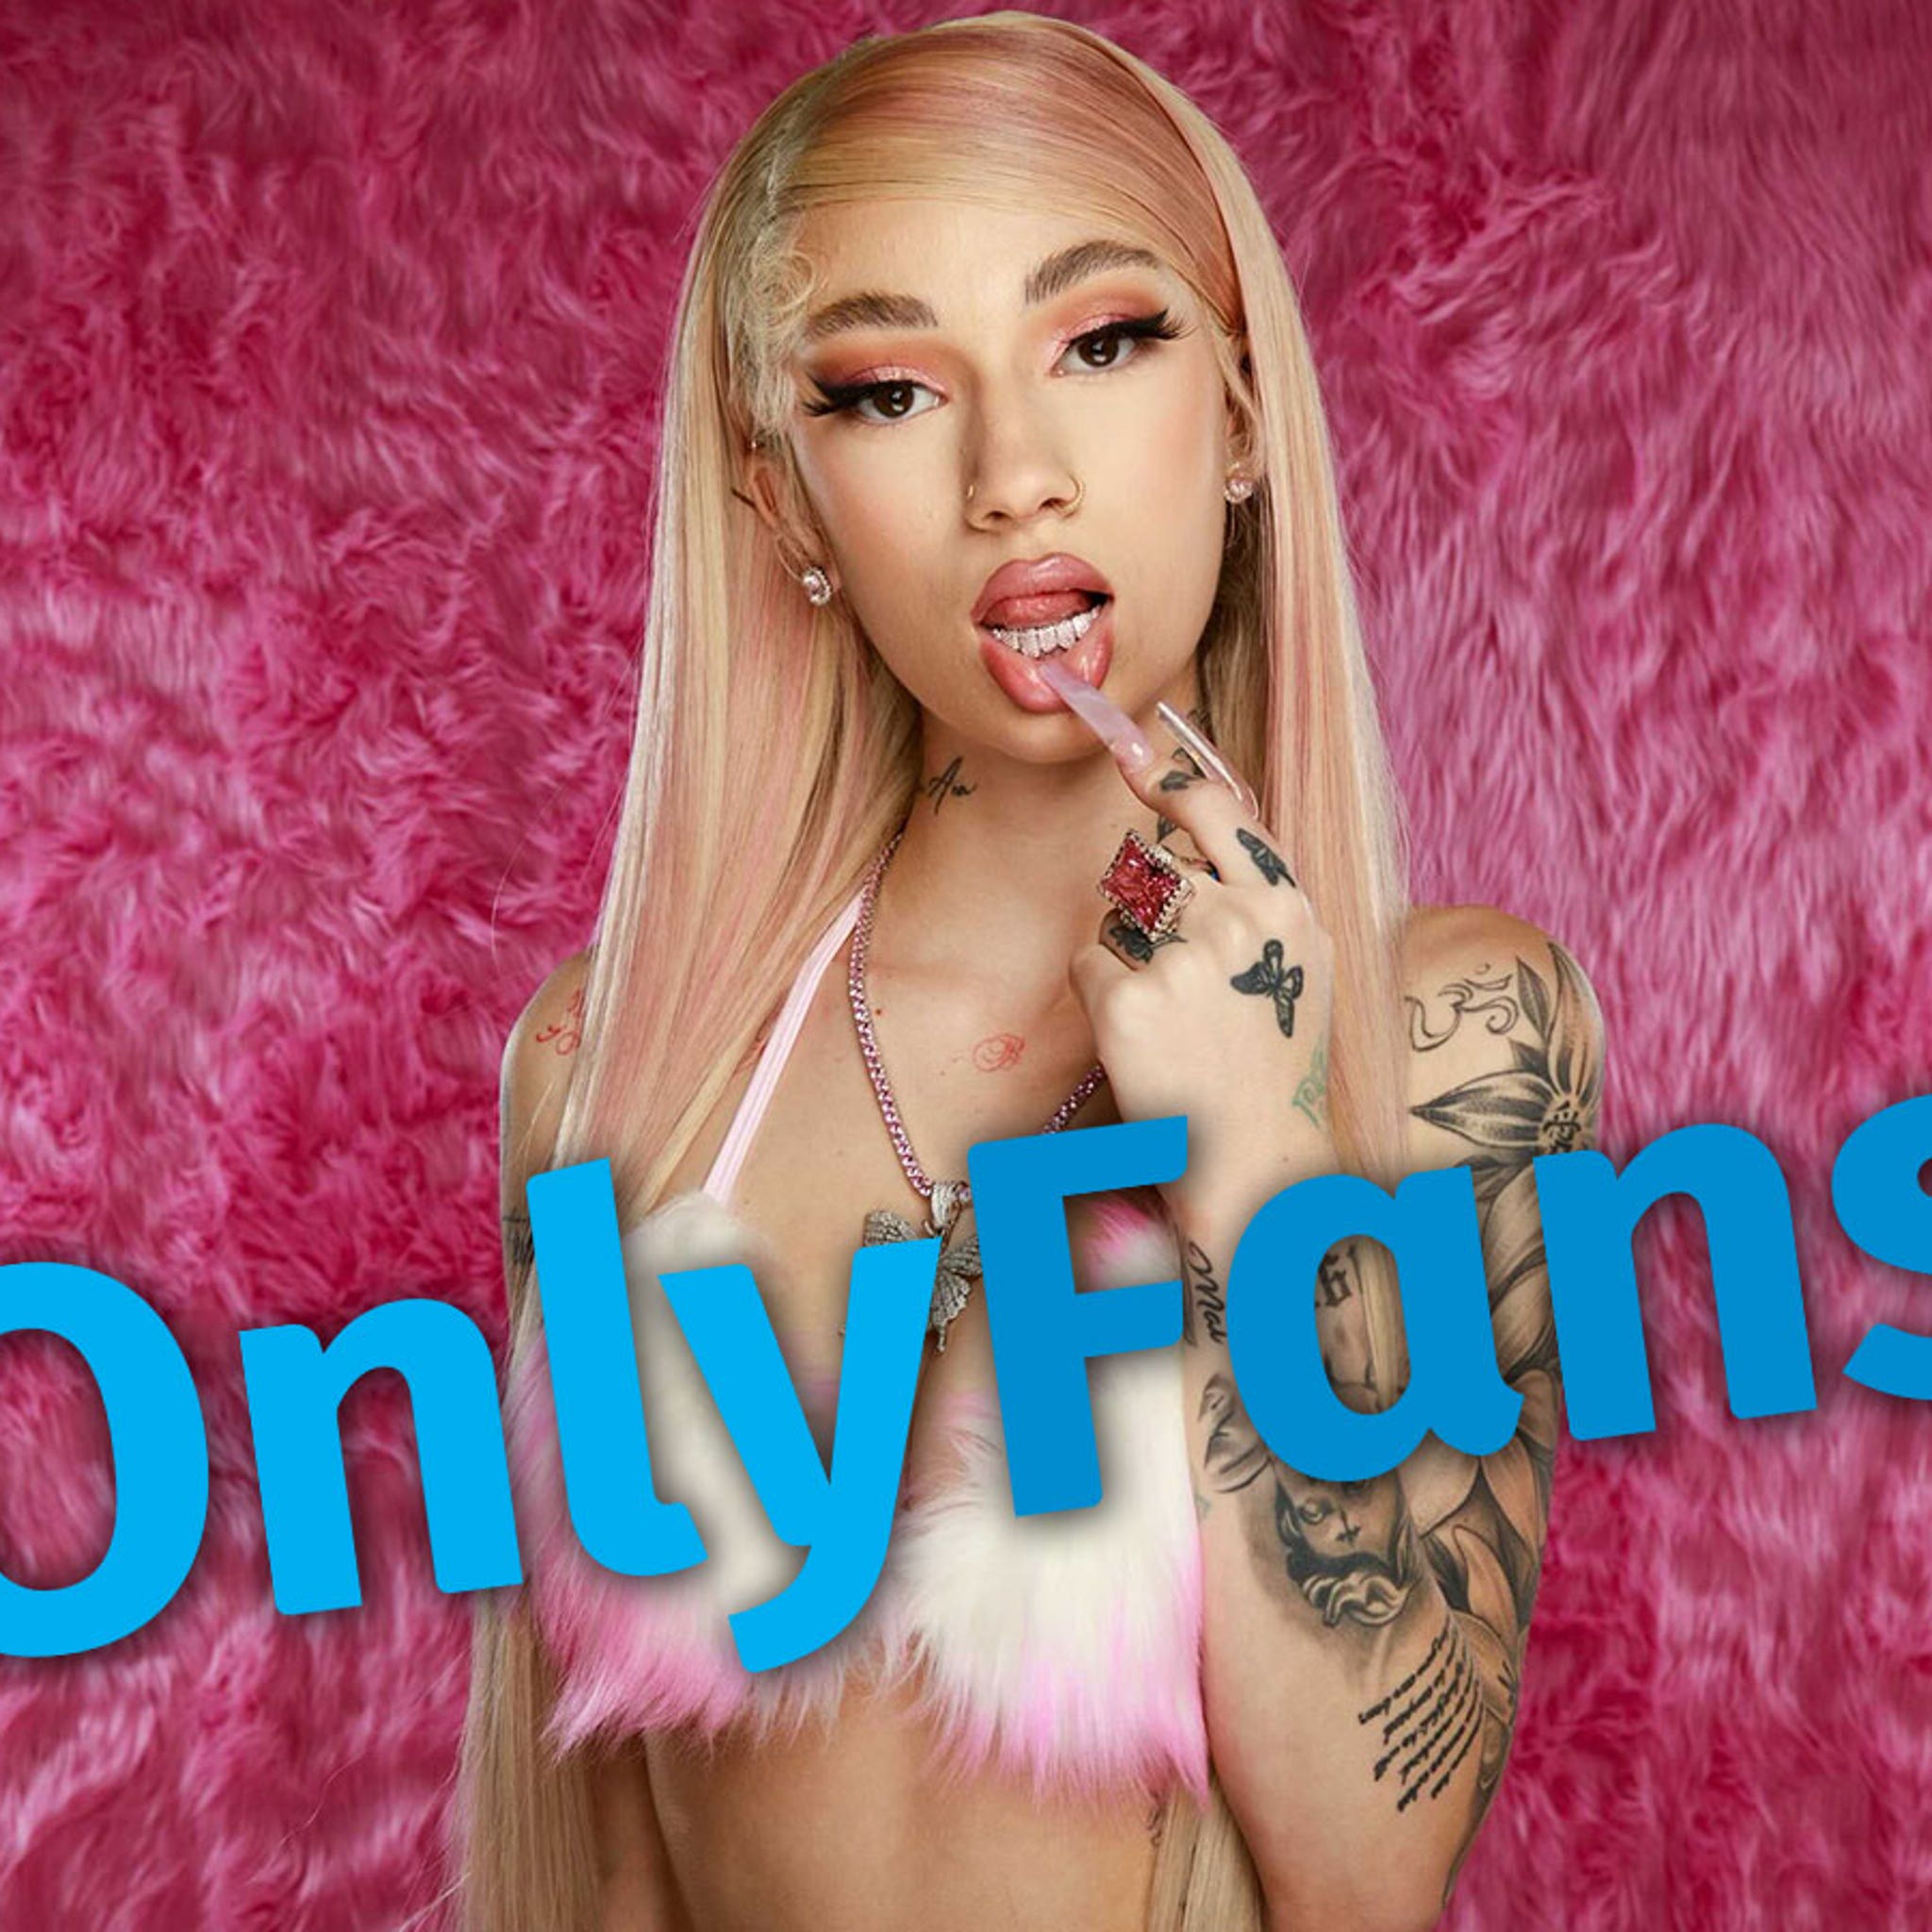 Bhad Bhabie Shows Alleged Proof She Made $50 Million on OnlyFans